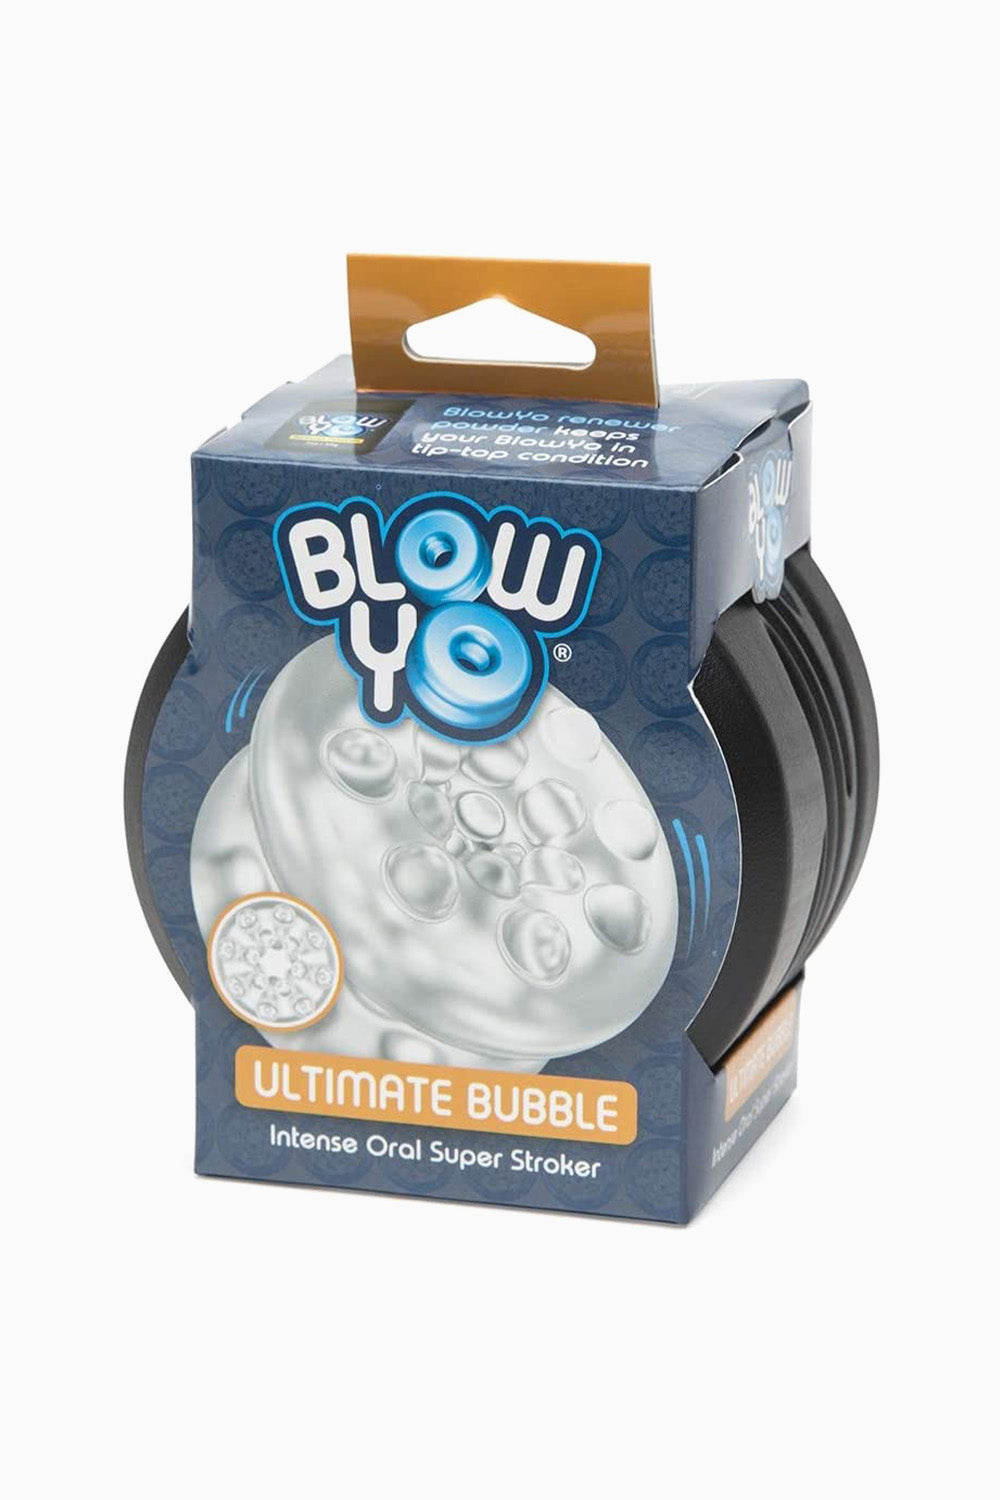 BlowYo Textured Blowjob Stroker - Ultimate Bubble, 2 Inches